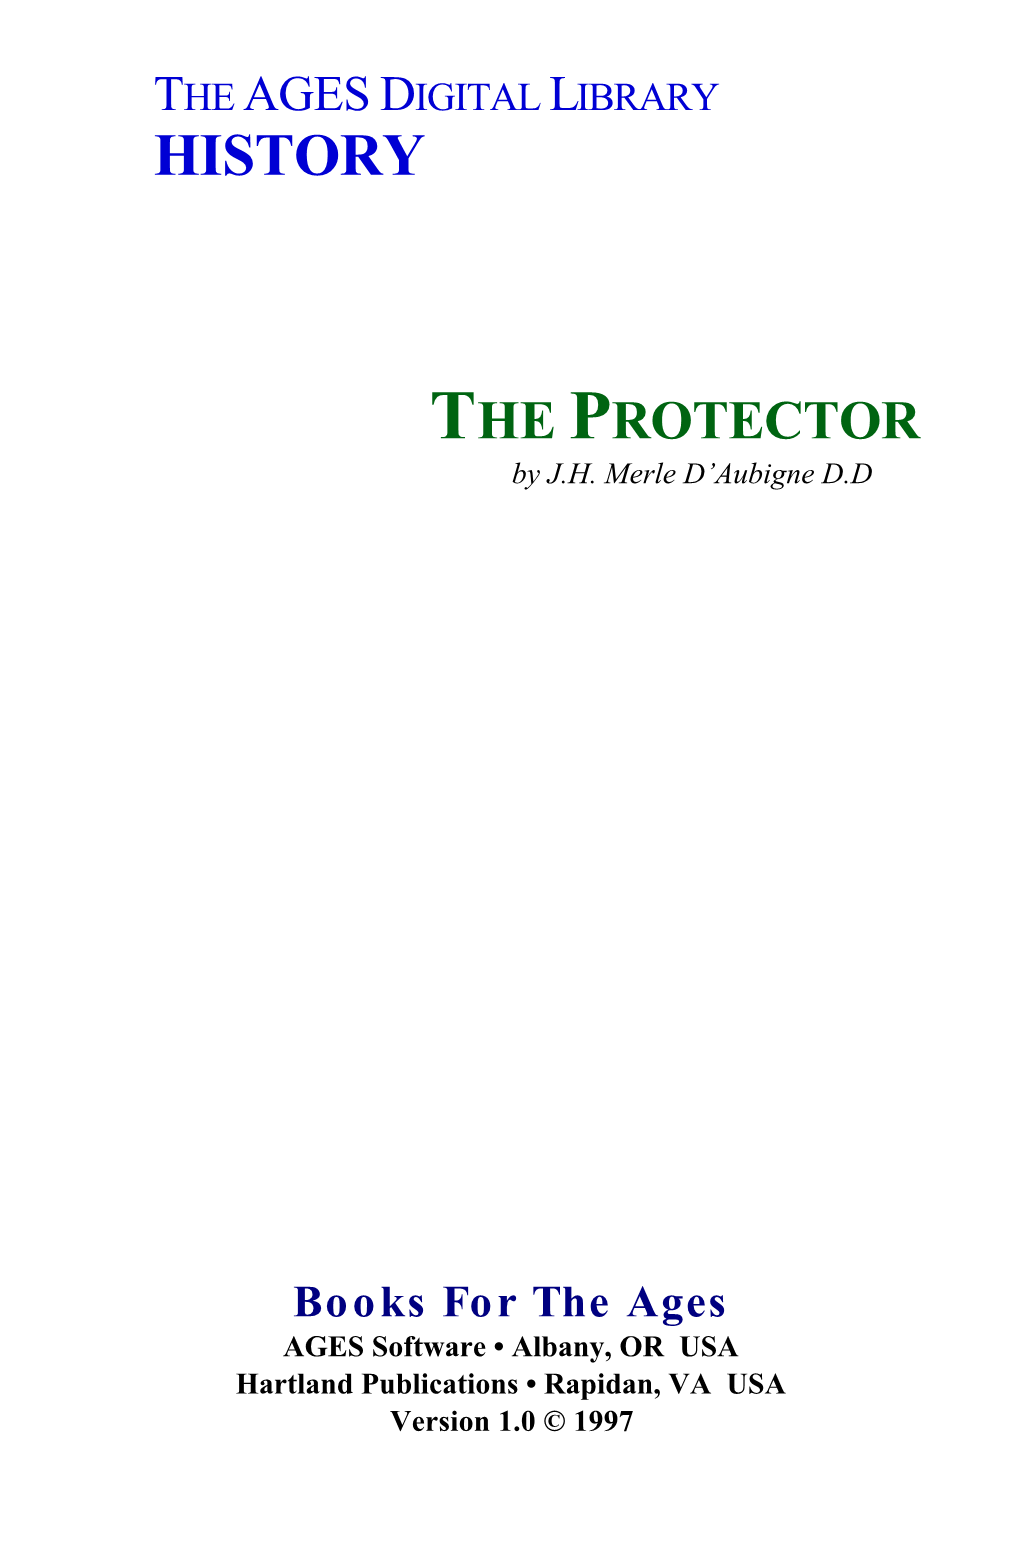 THE PROTECTOR by J.H